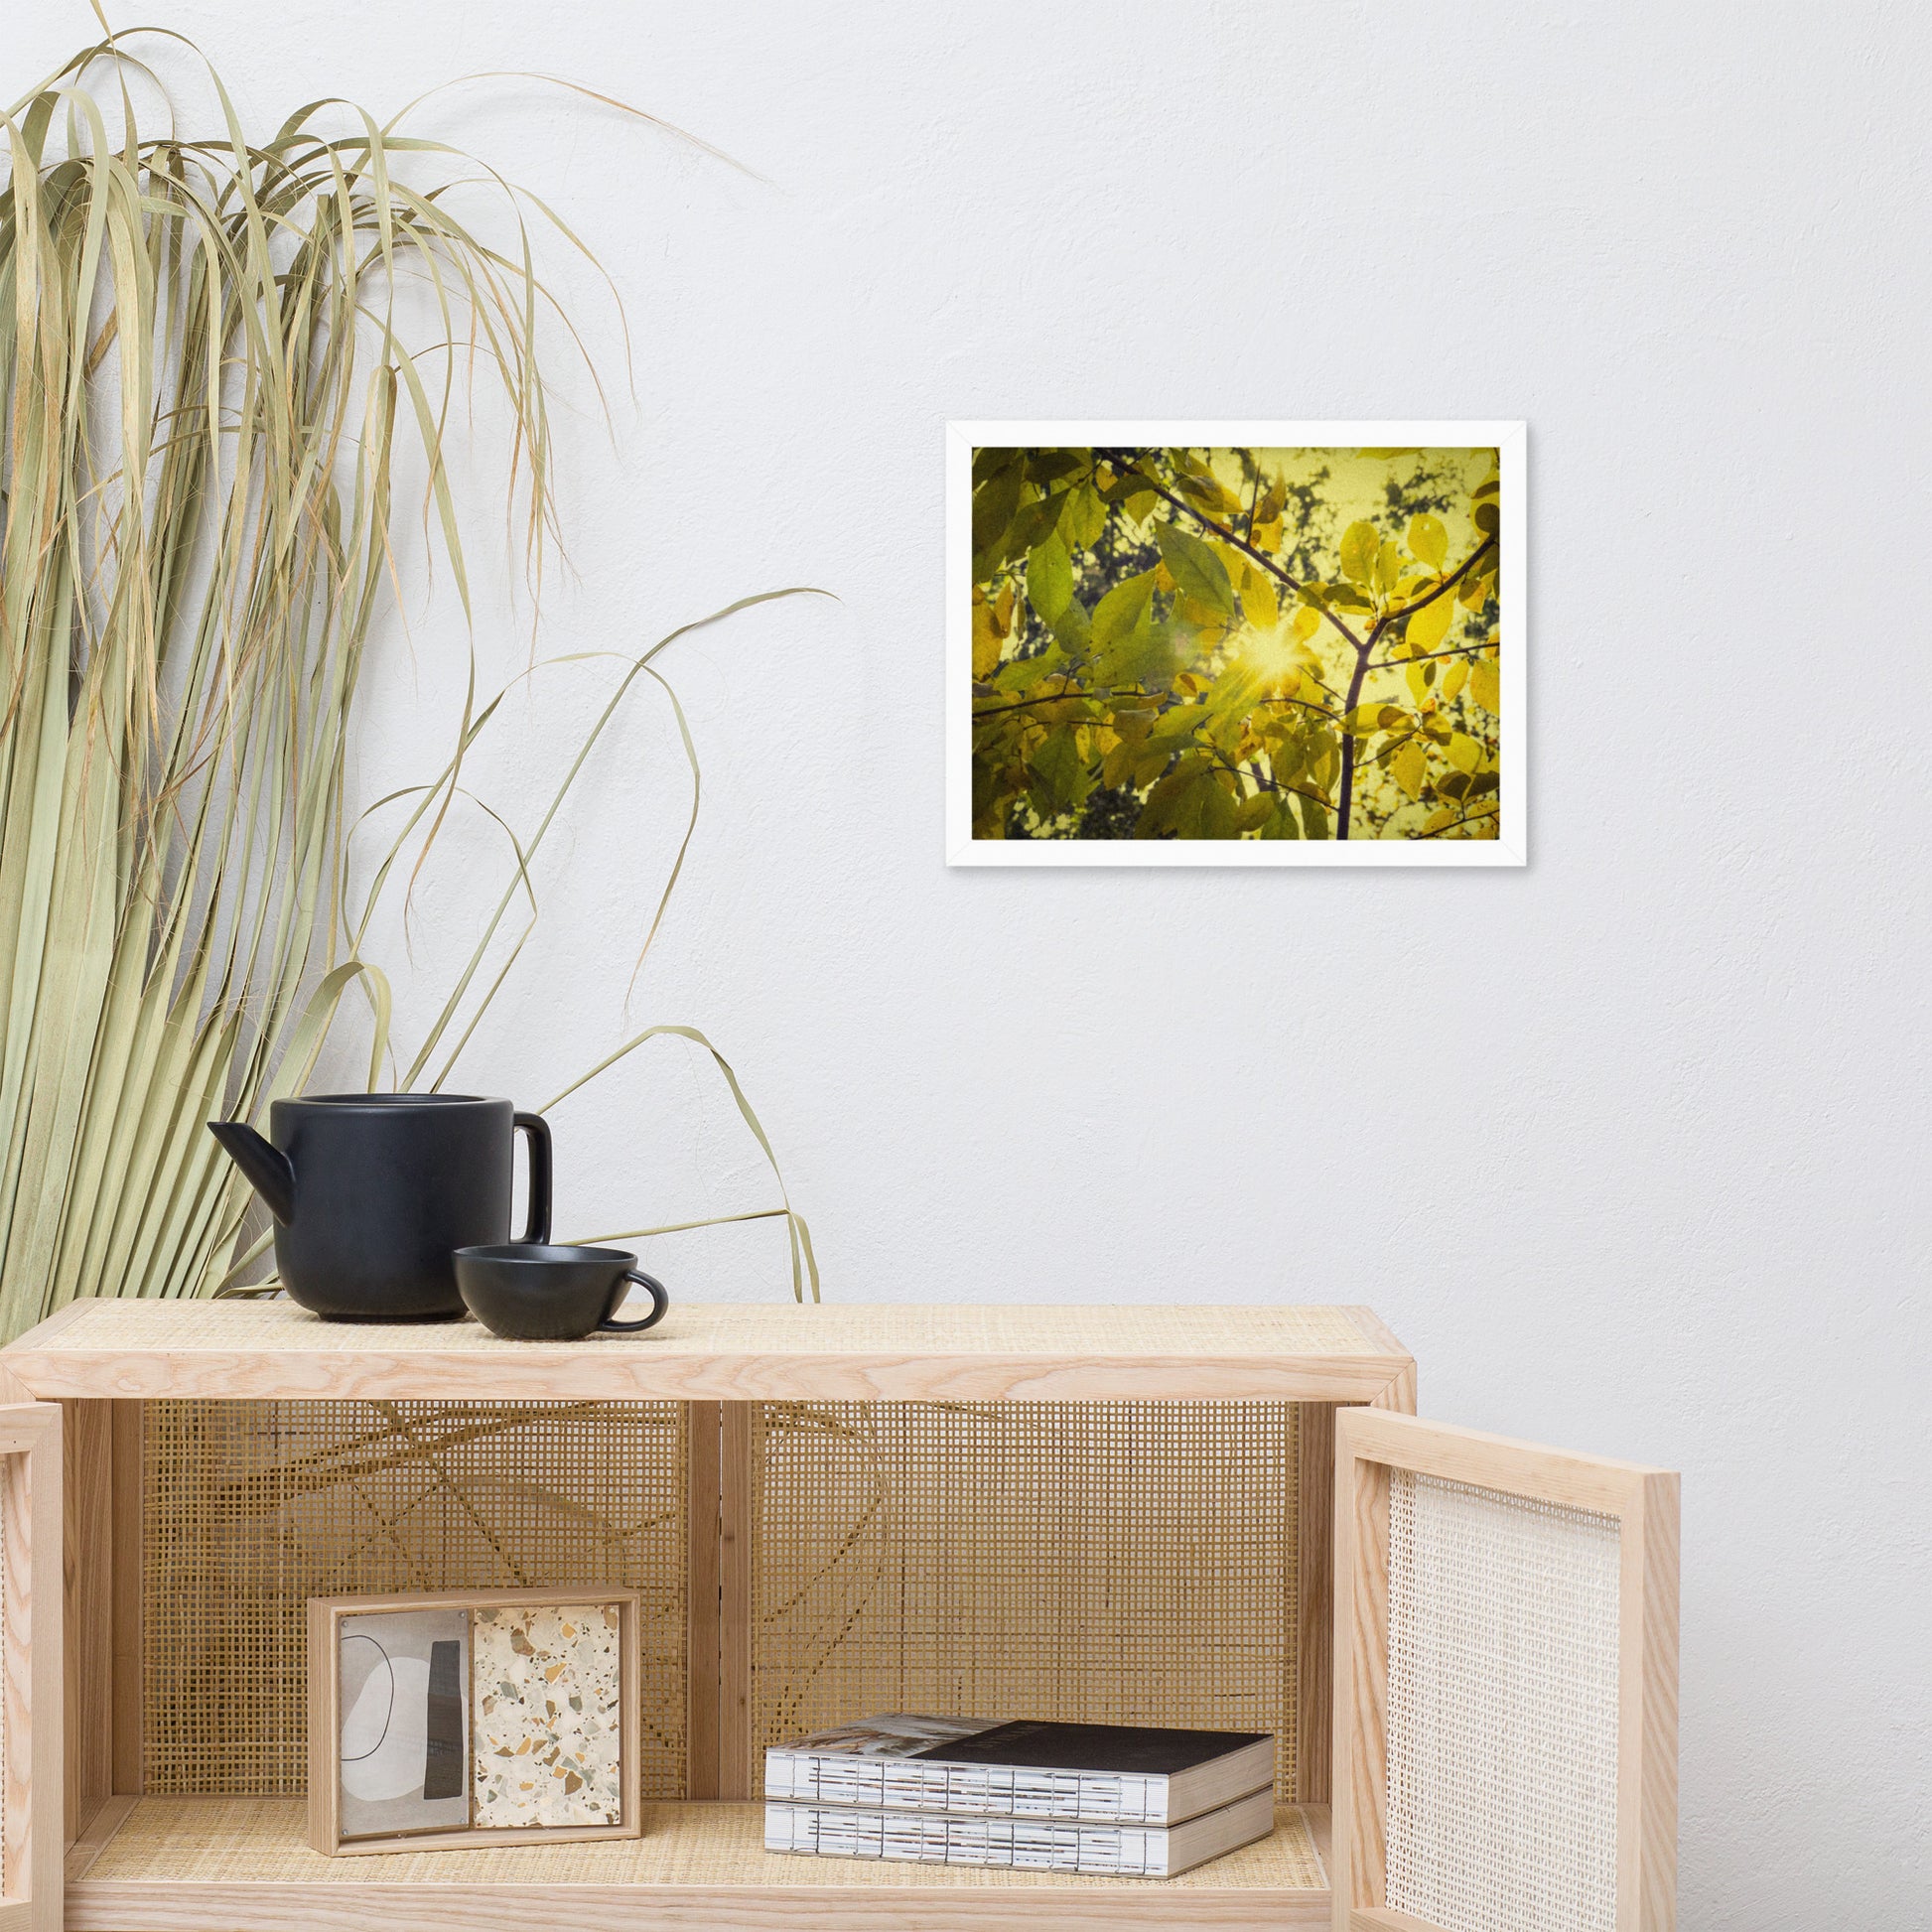 Hallway Framed Pictures: Aged Golden Leaves Abstract / Country Farmhouse Style / Botanical / Nature Photo Framed Wall Art Print - Artwork - Home Decor